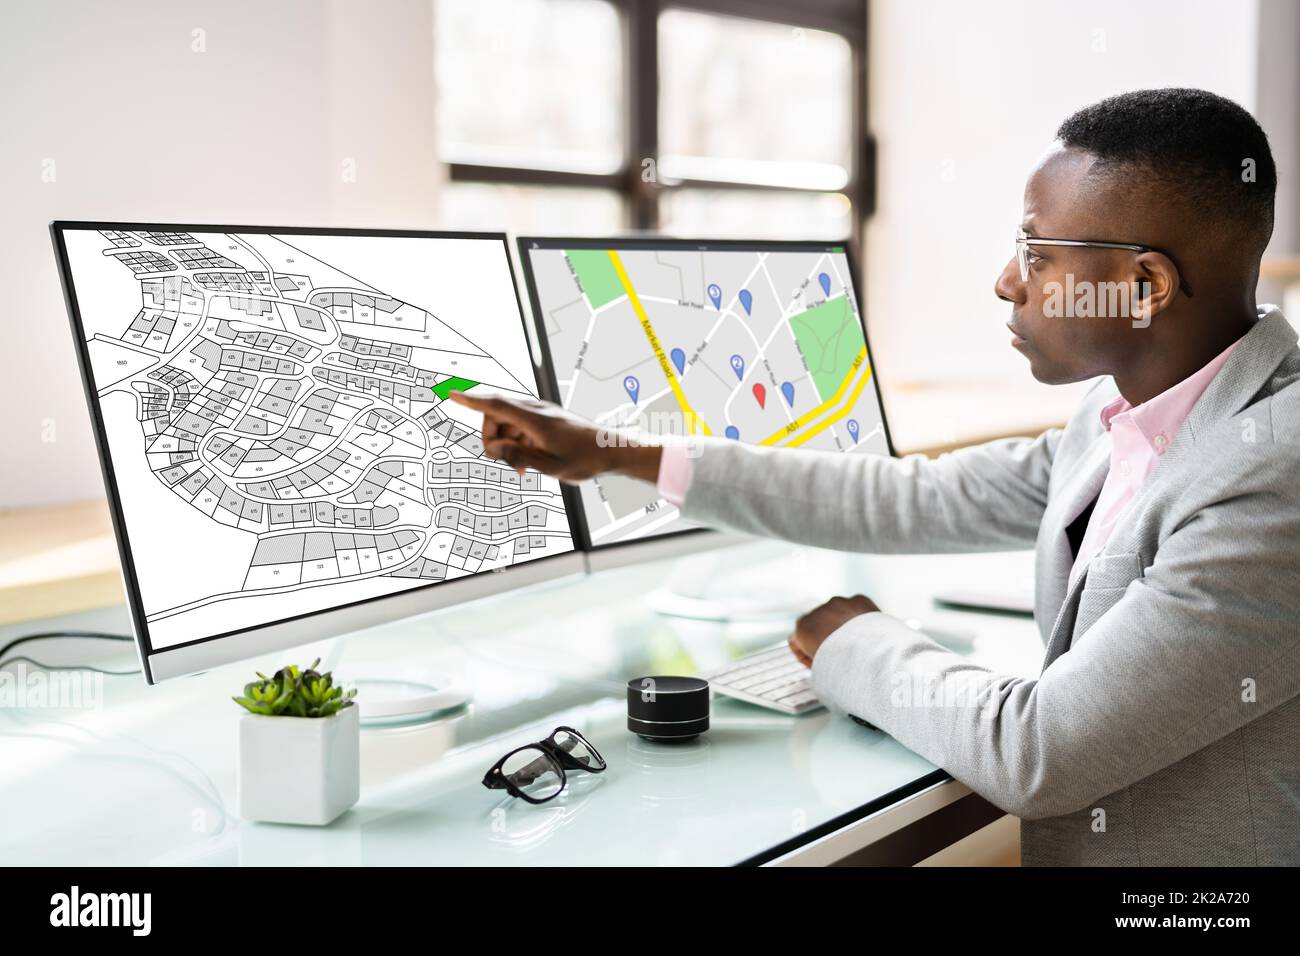 African American Using Cadastral Map Stock Photo